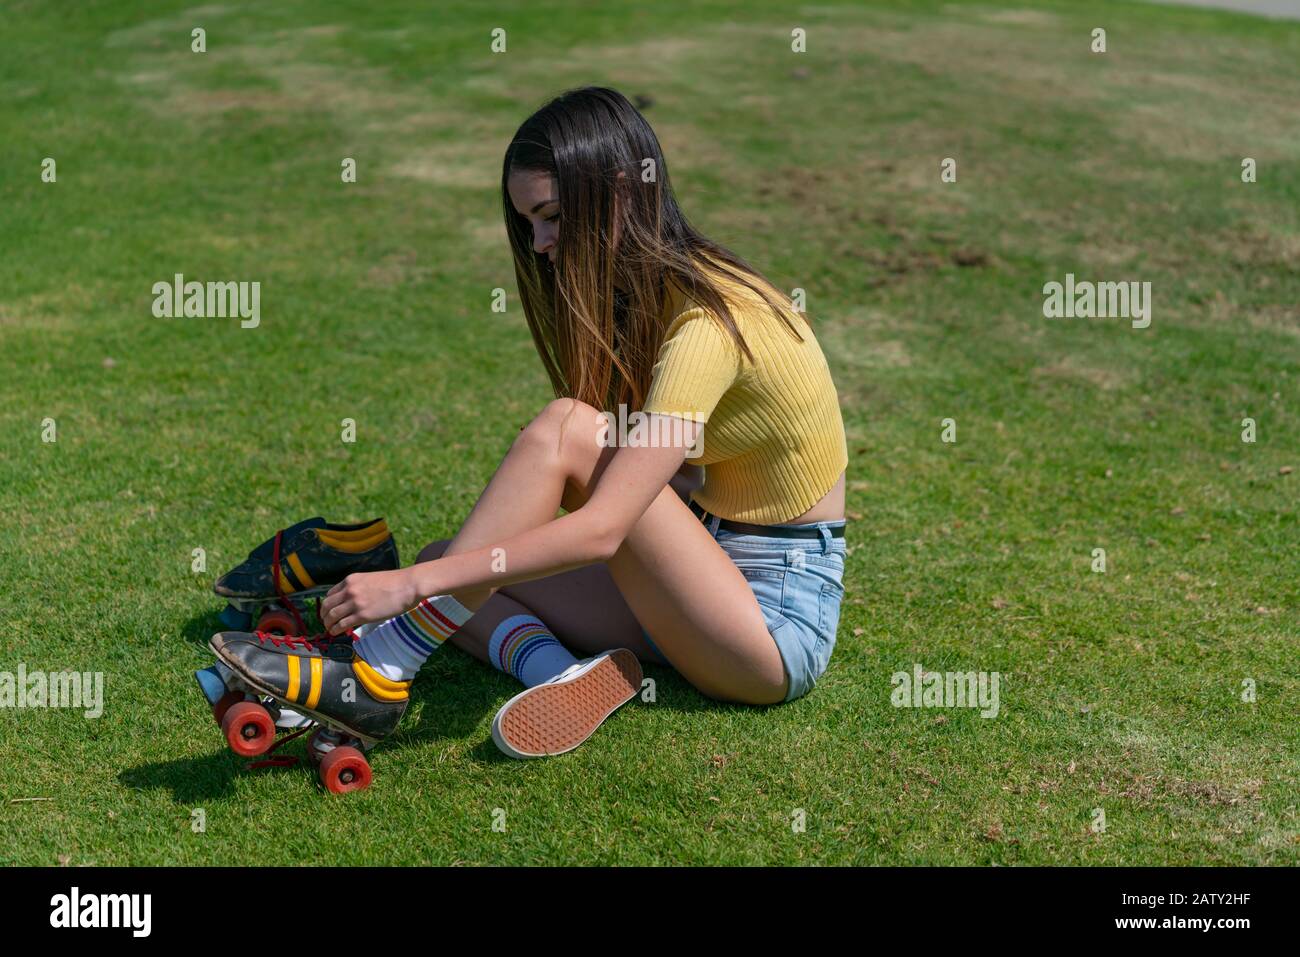 Pretty teenage girl in yellow top sits on grass putting retro style roller skates on getting ready to go skating. Stock Photo